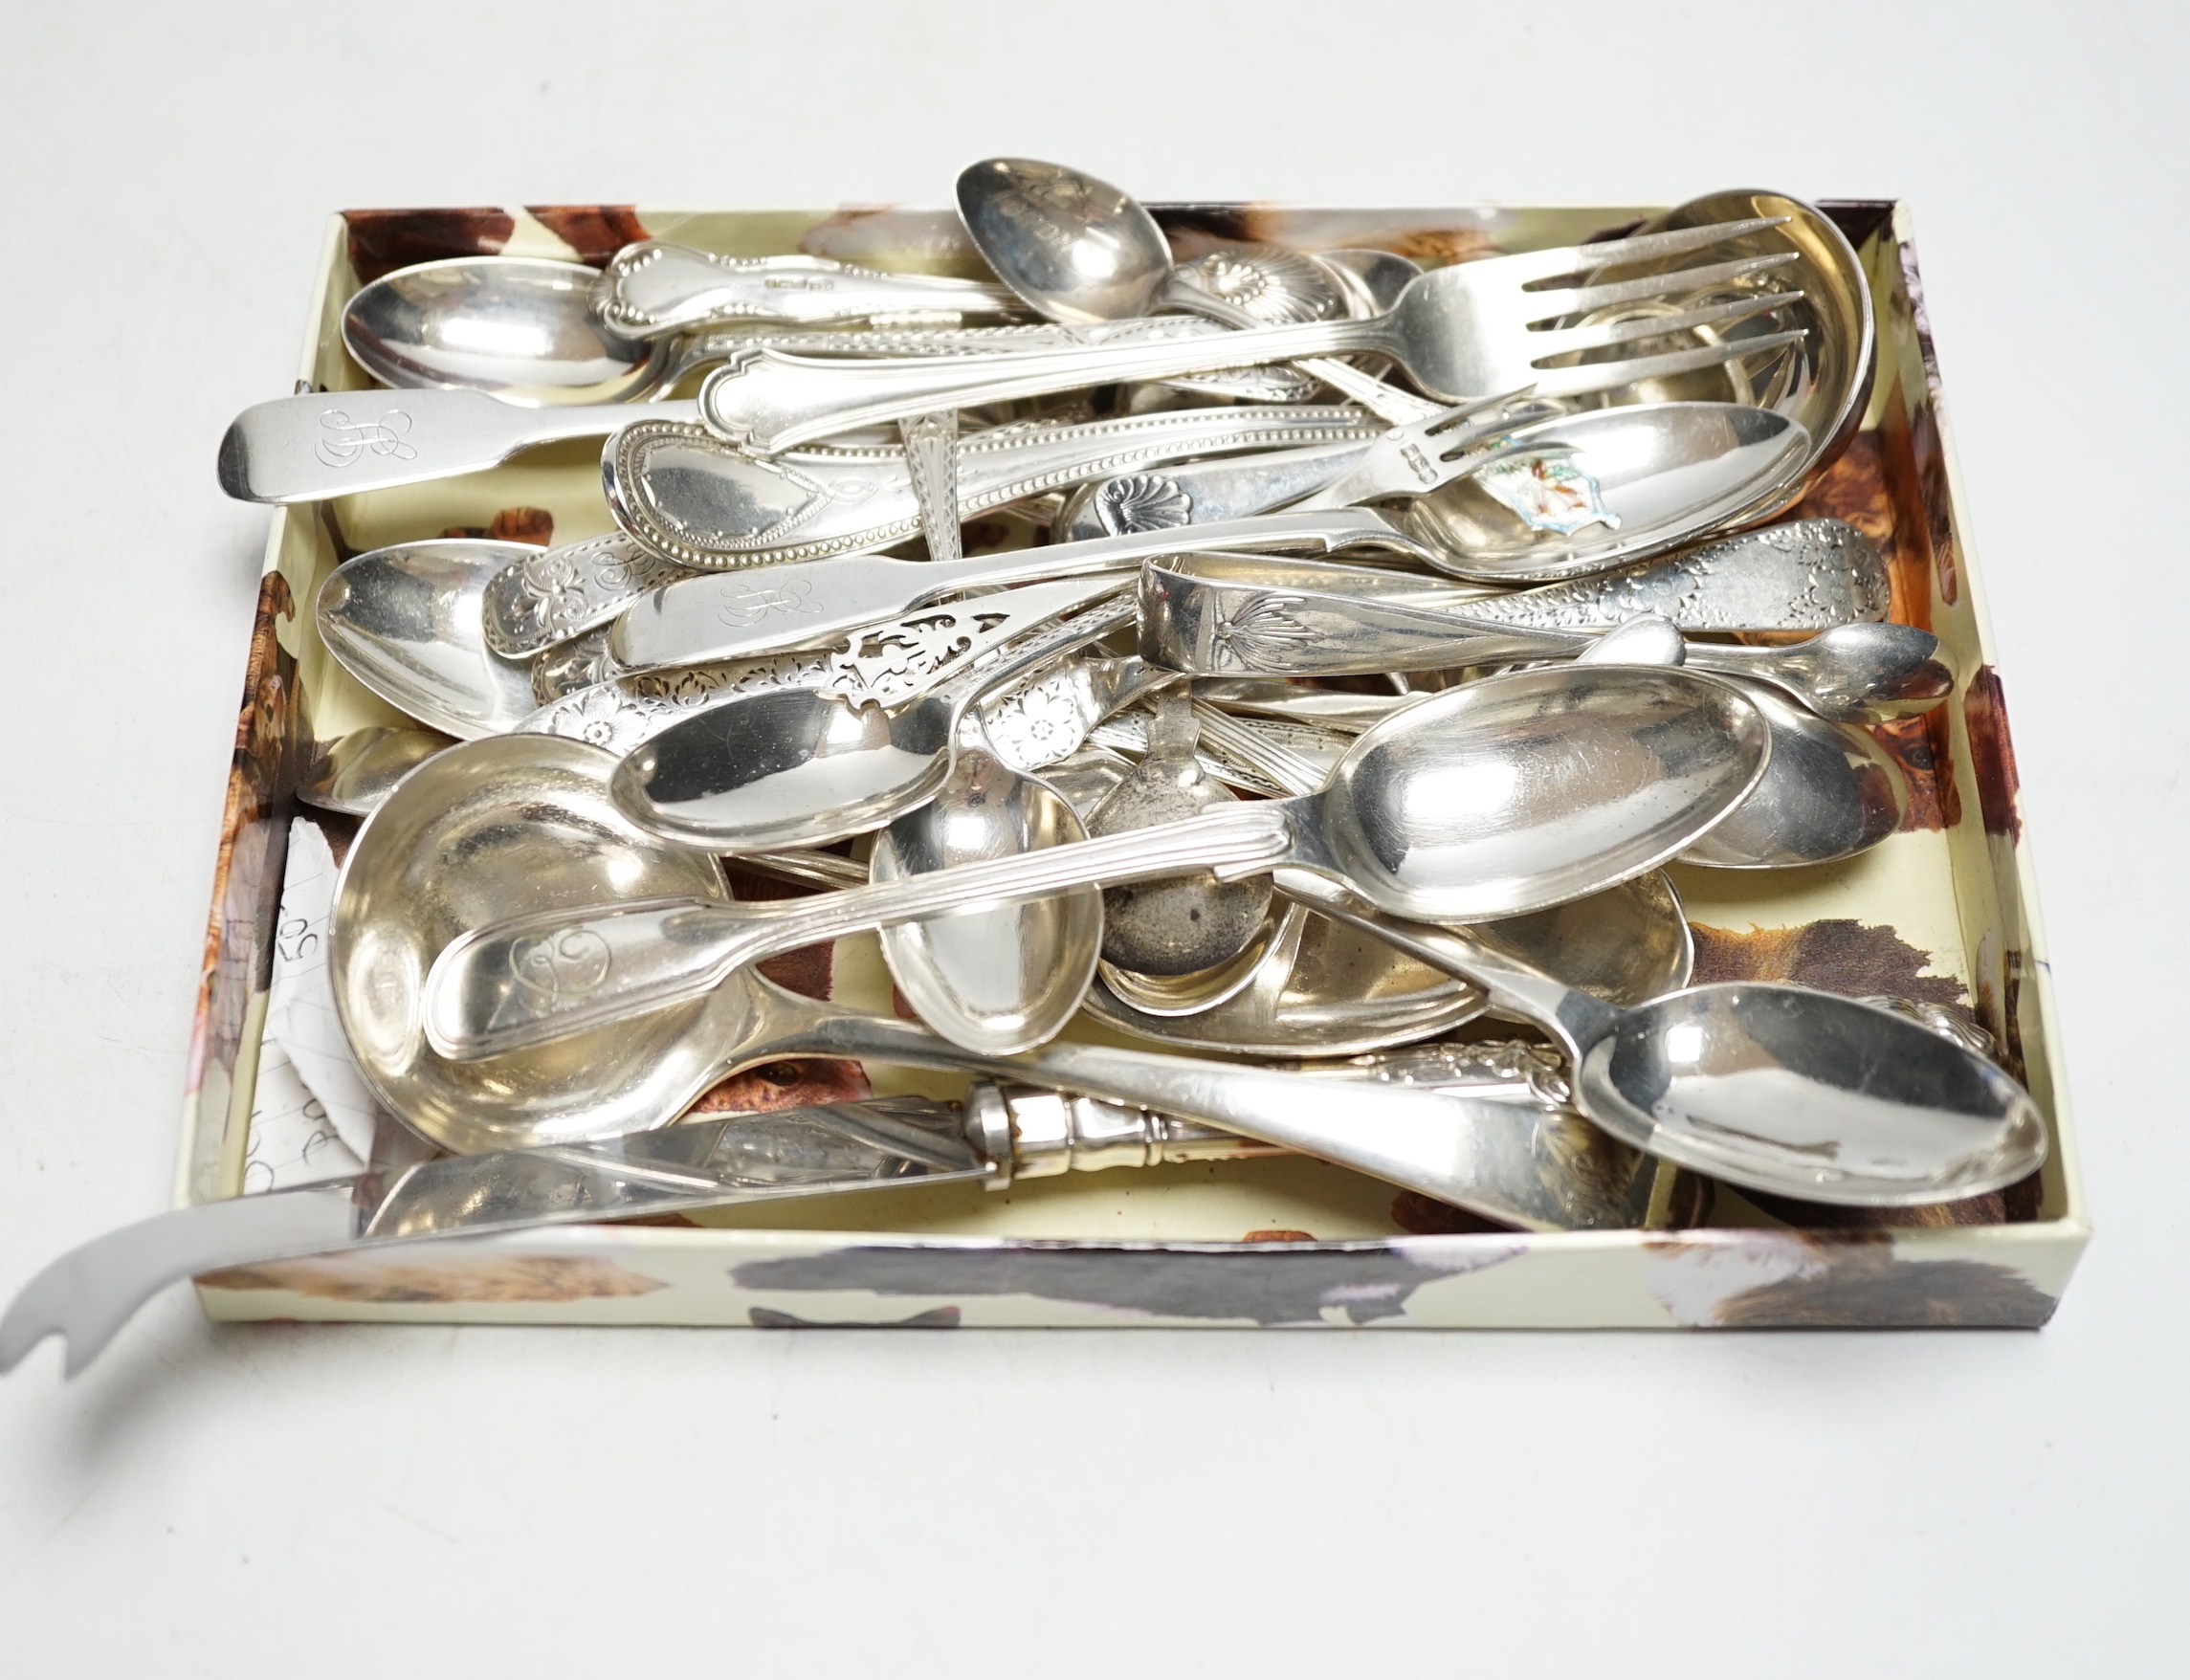 Sundry silver cutlery, including a butter knife, teaspoons, condiment spoons, sauce ladles, etc.